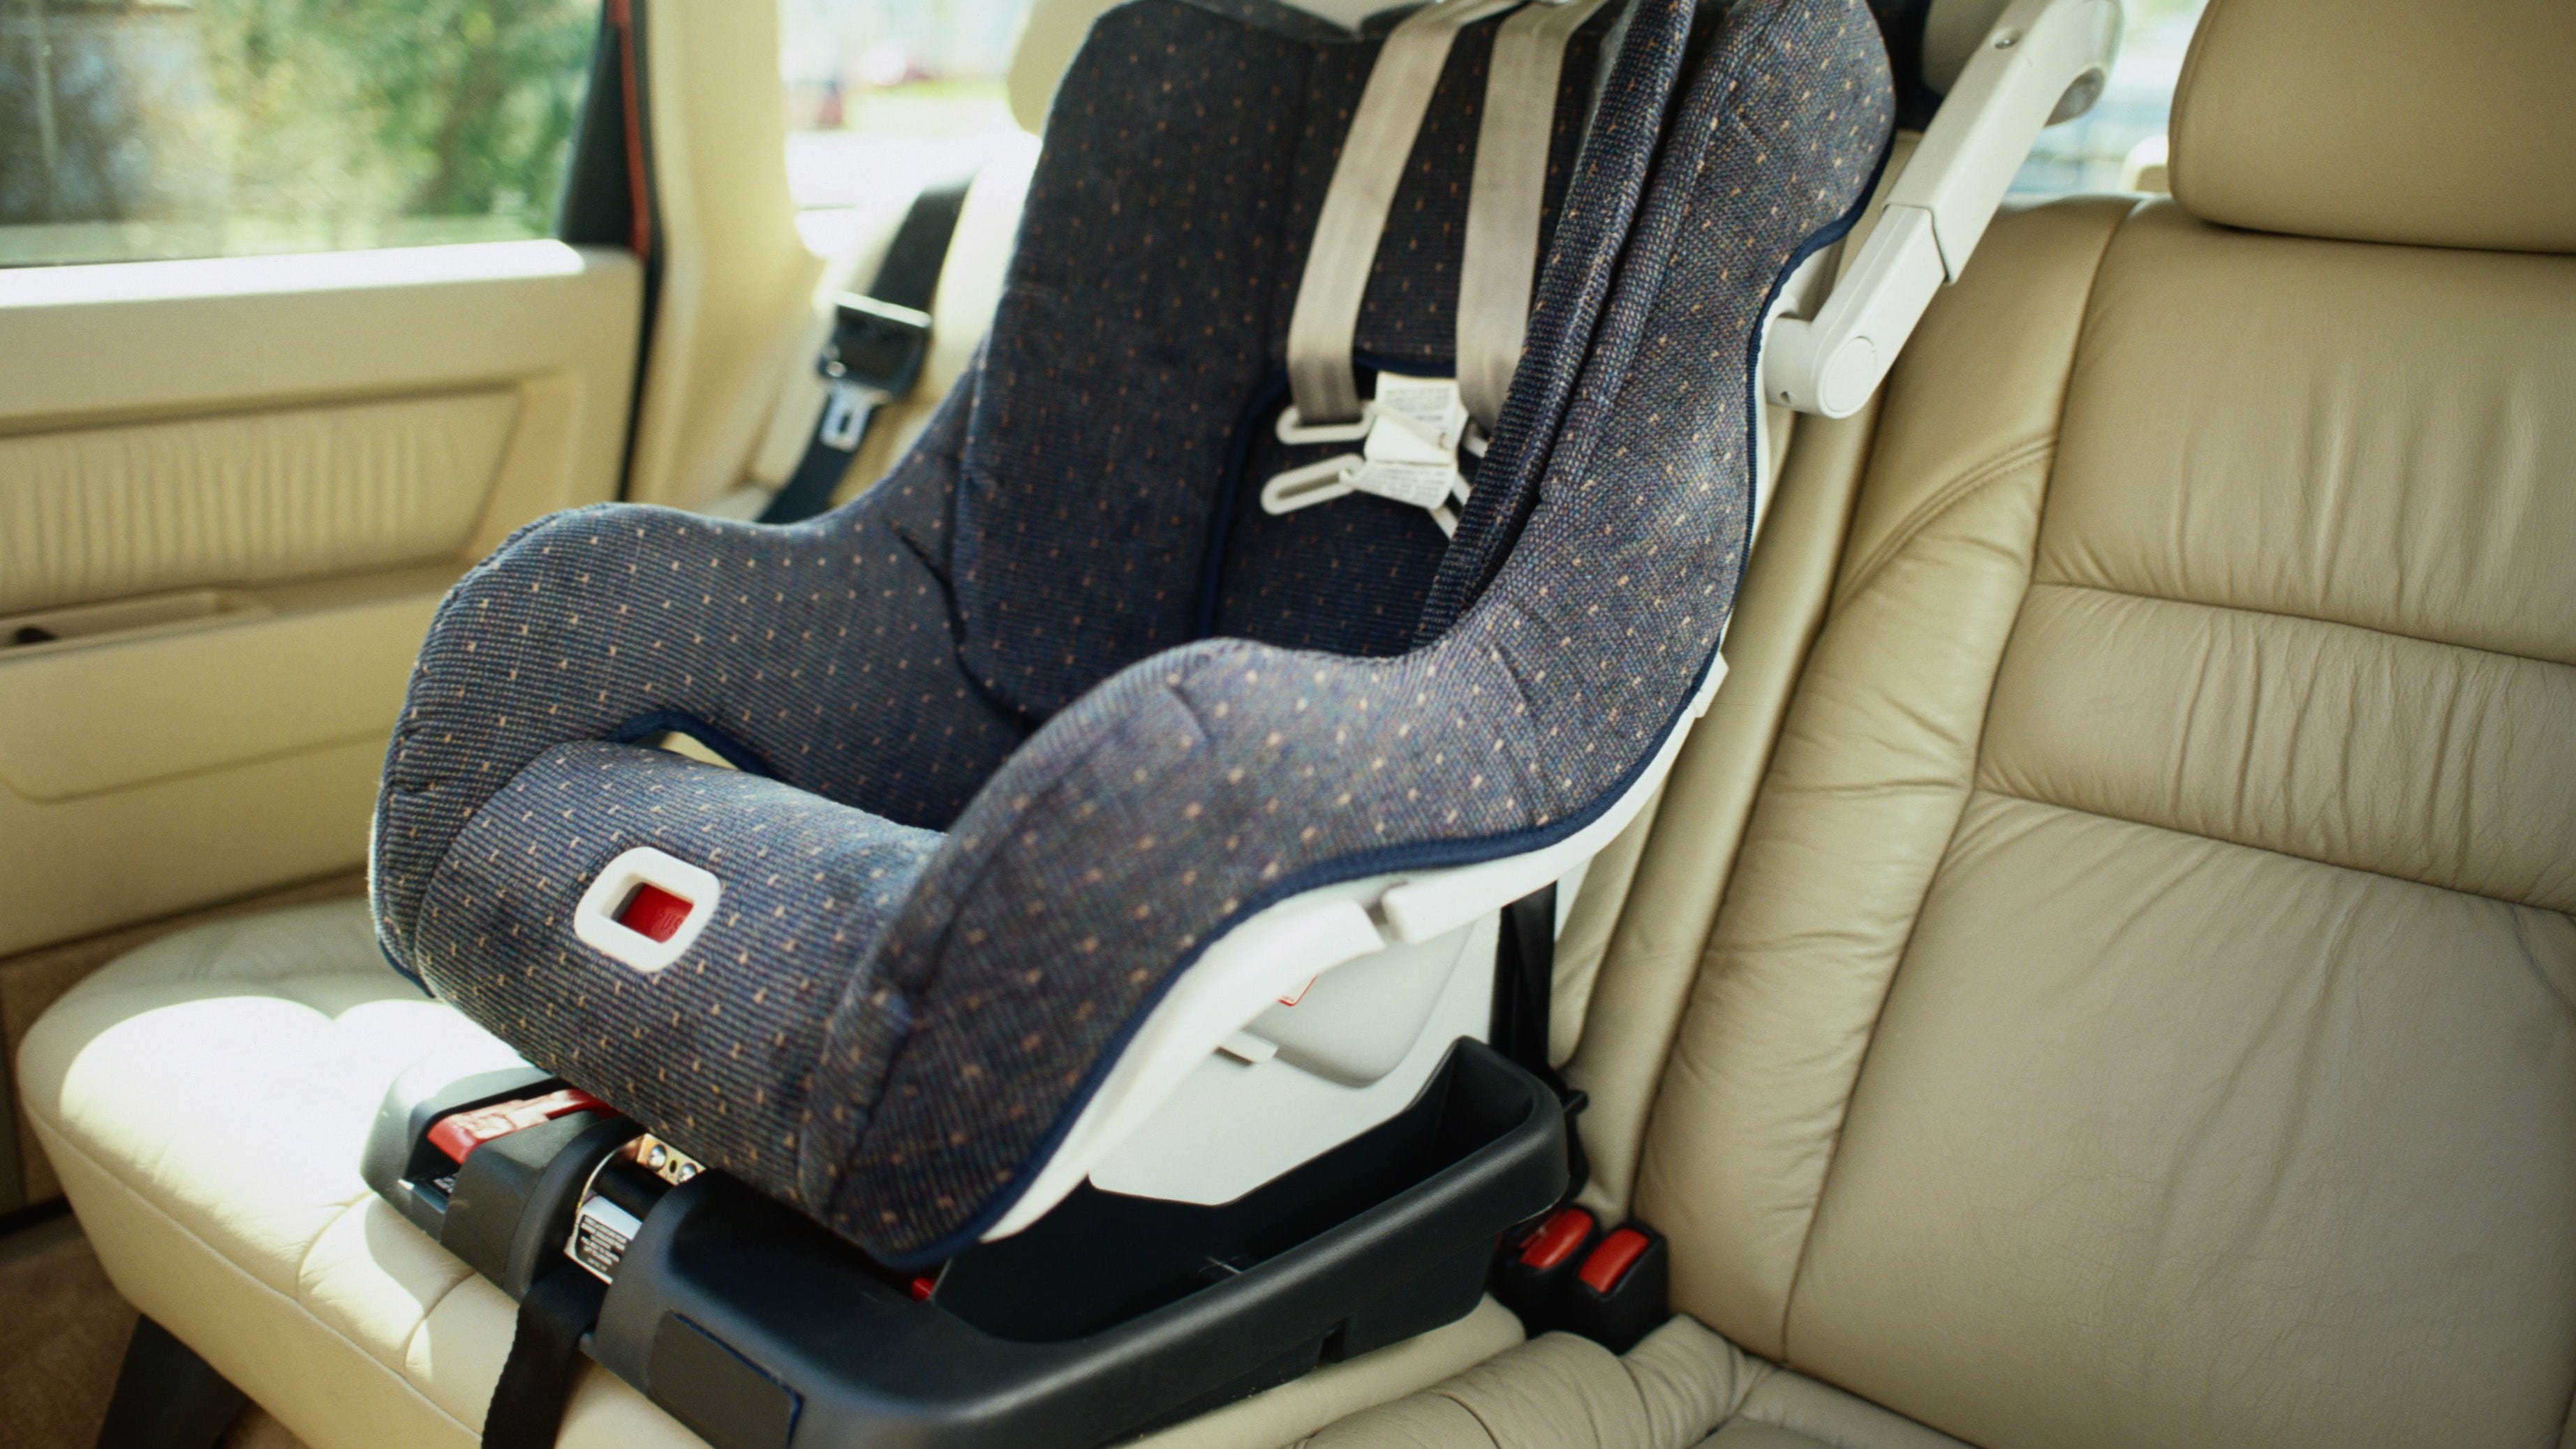 New Aap Car Seat Safety Guidelines When A Child Should Face Forward - What Are The Regulations For Forward Facing Car Seats